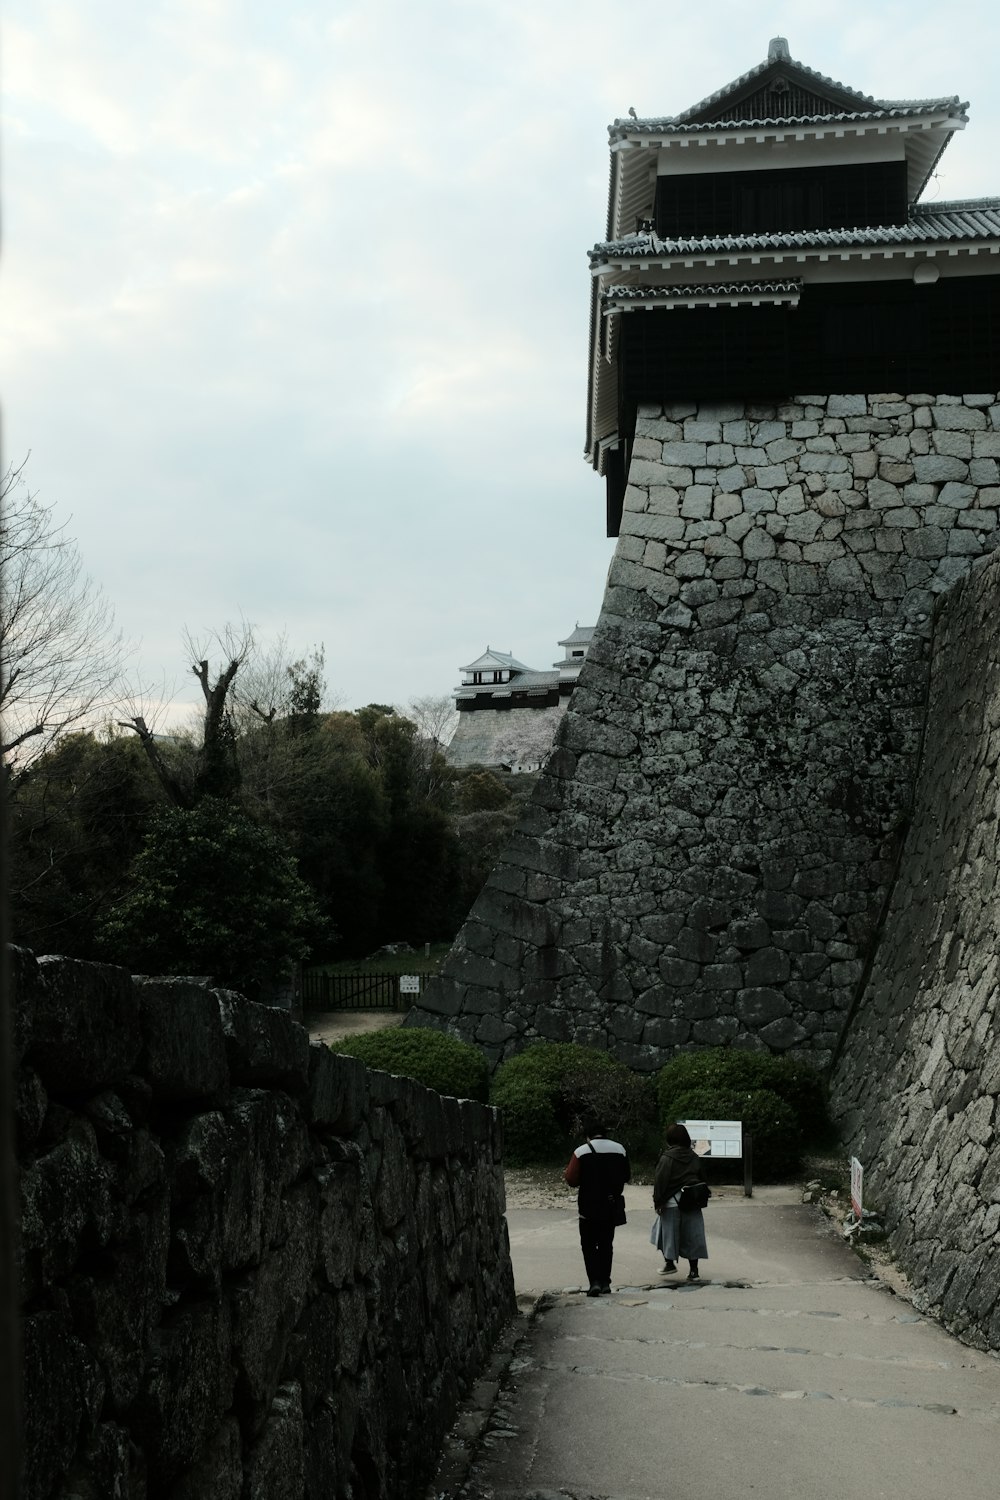 a couple of people walking down a street next to a stone wall